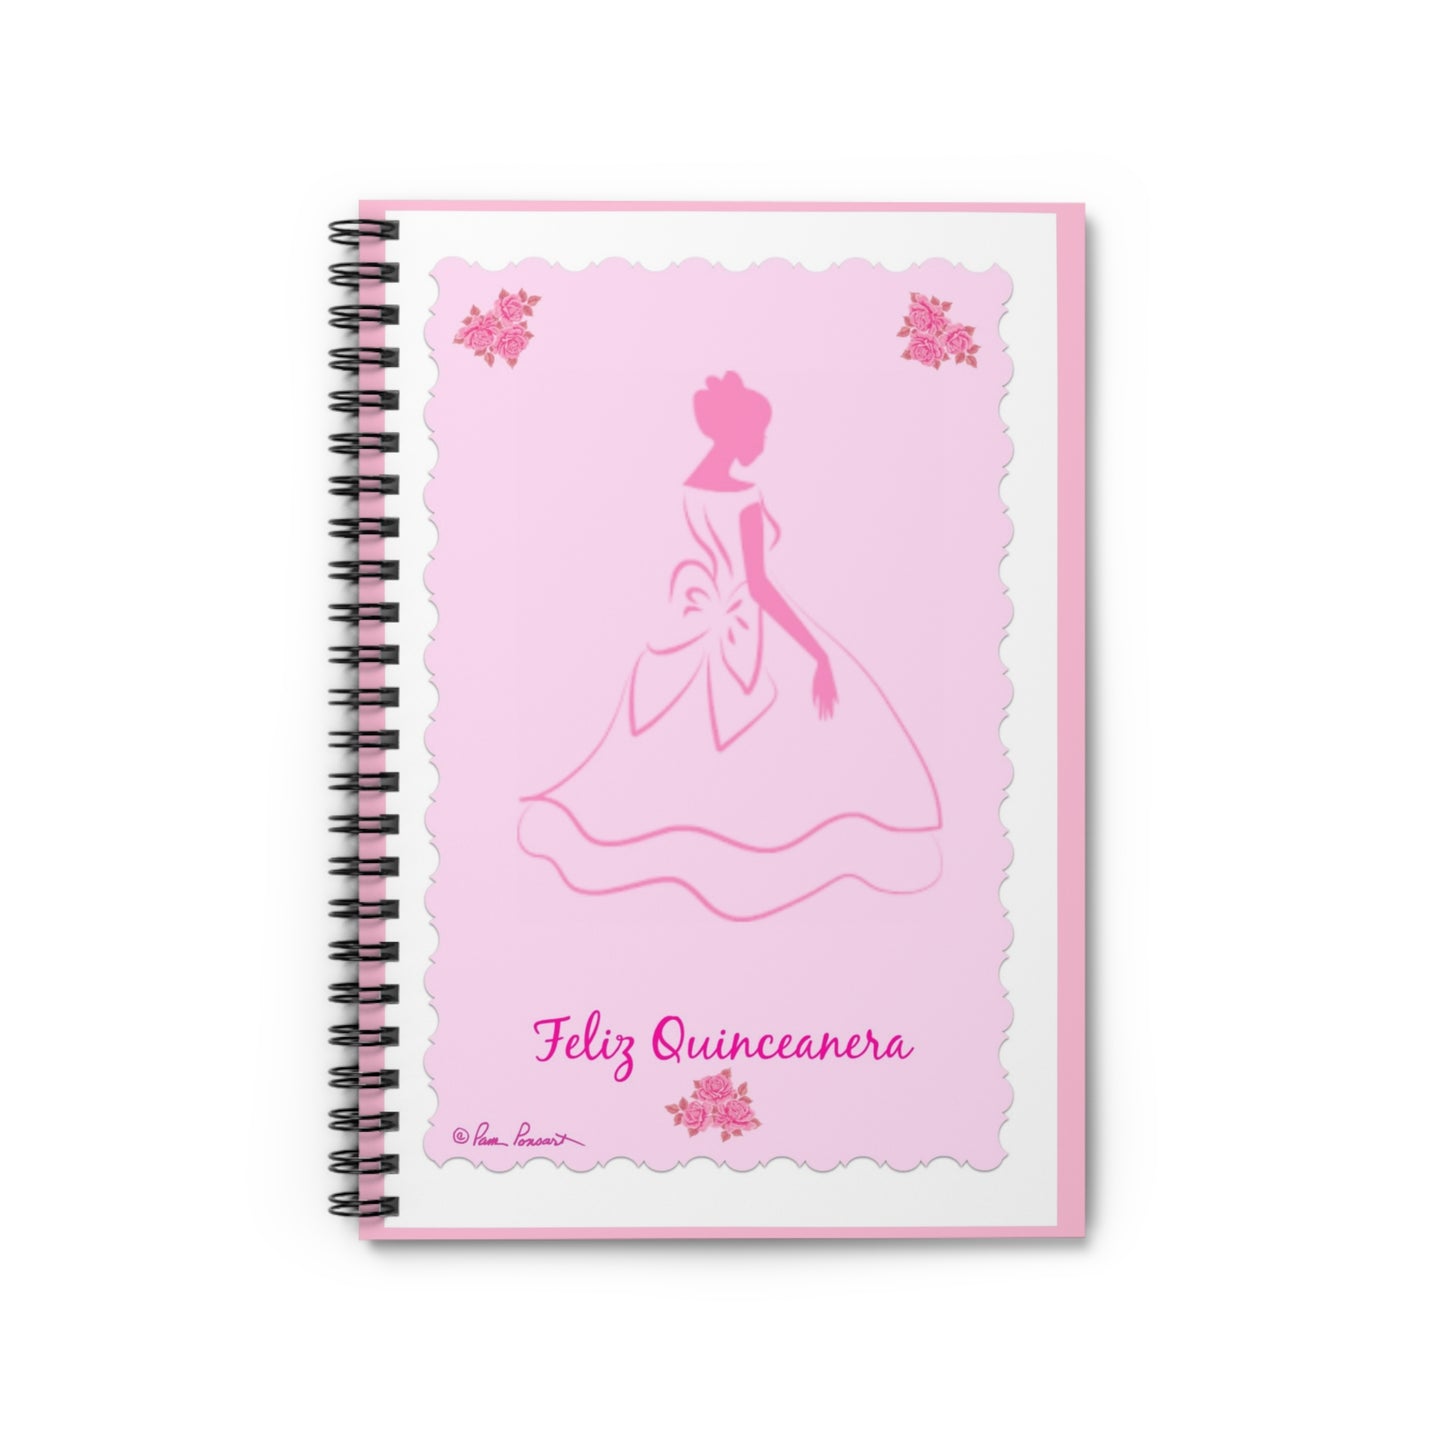 Latina Quinceanera Notebook: 6" x 8"; 118 Lined pages